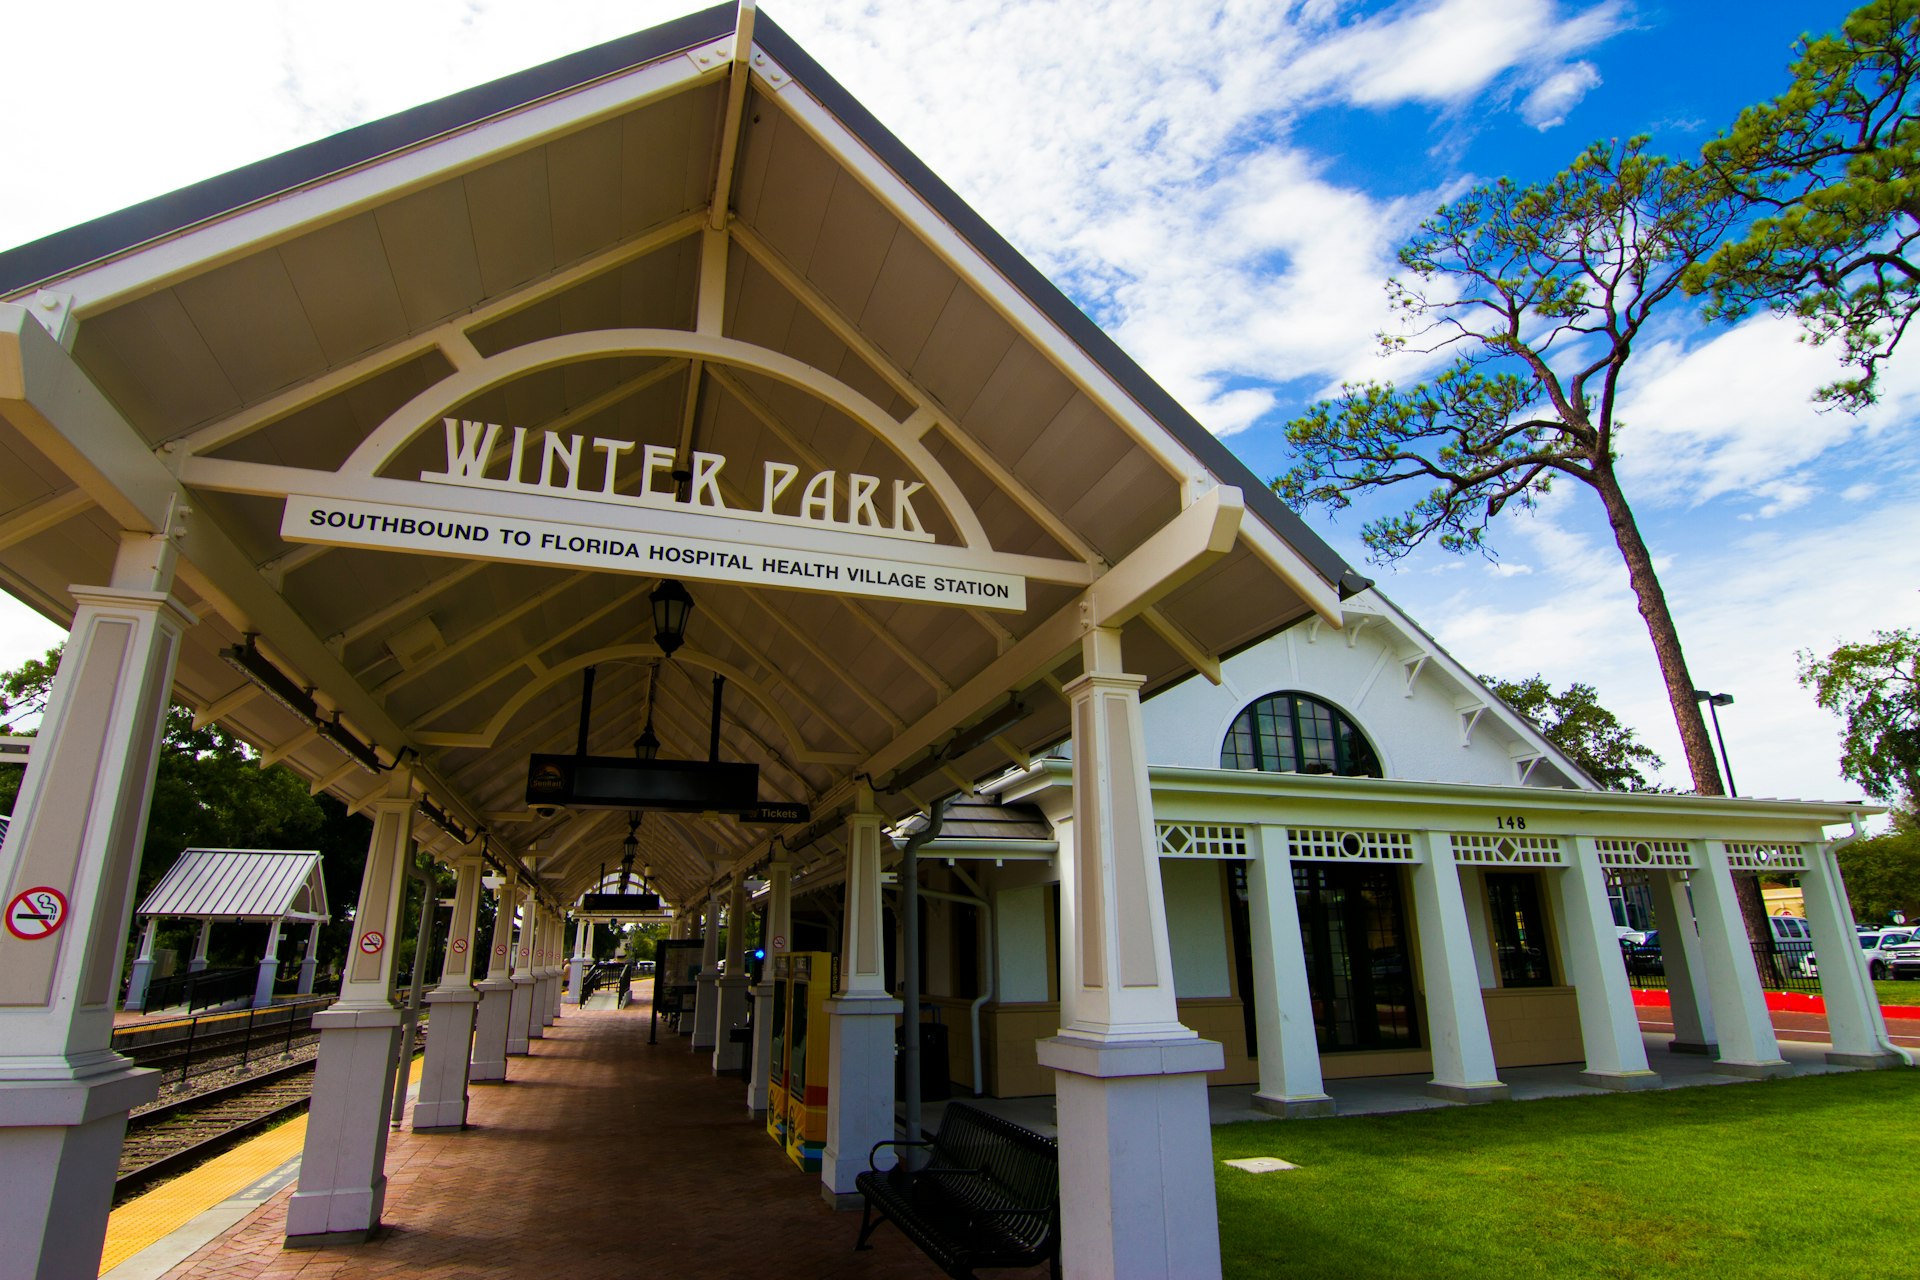 A train station reading "Winter Park"